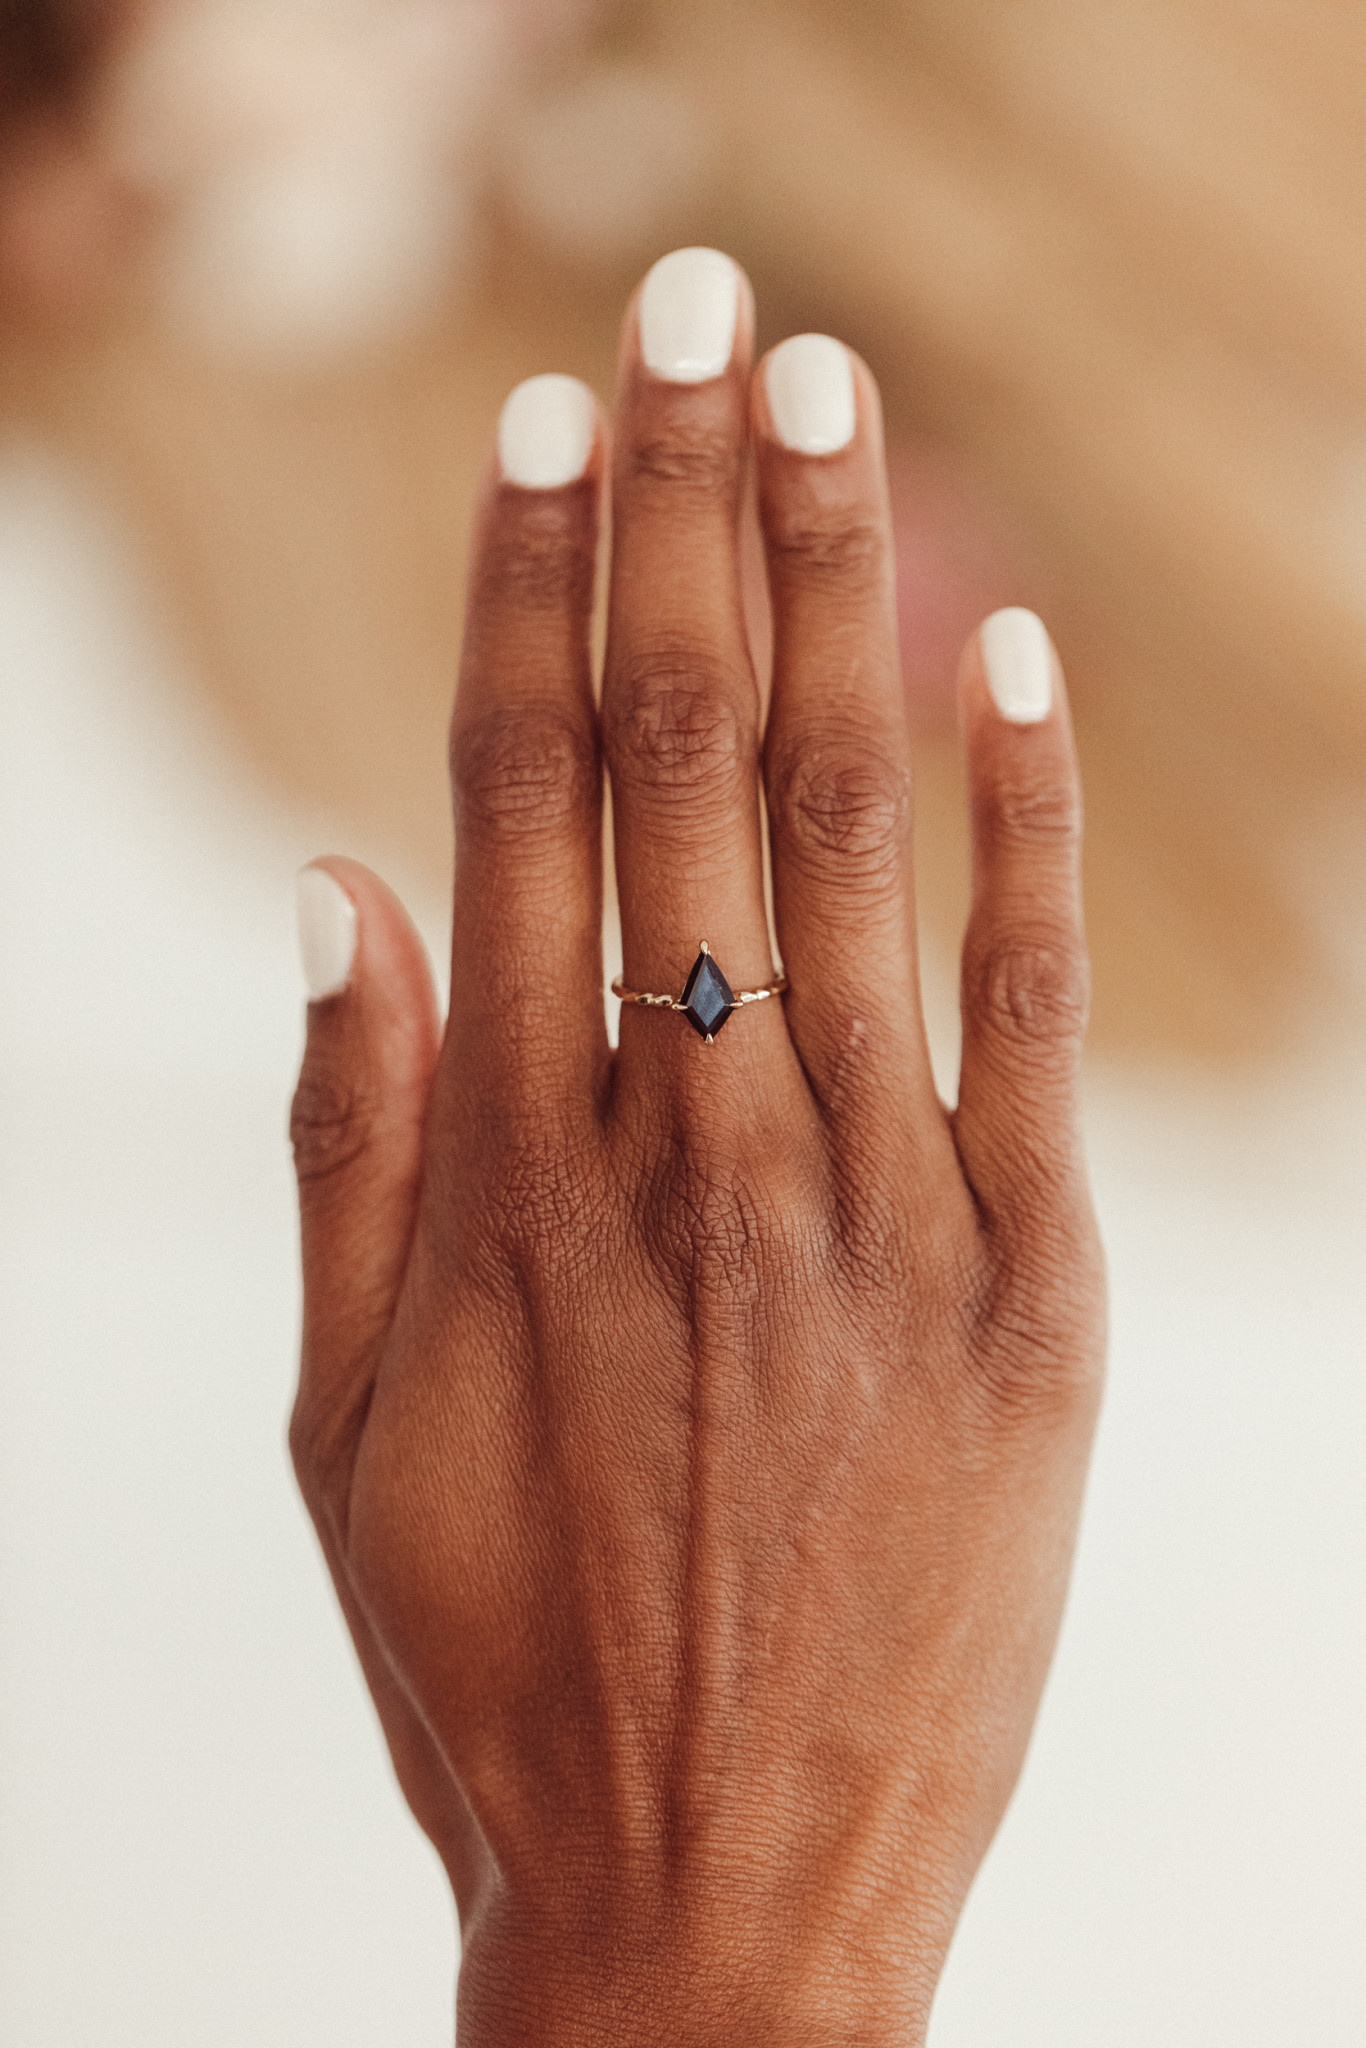 What It May Mean if A Man Has a Black Wedding Band On Right Hand